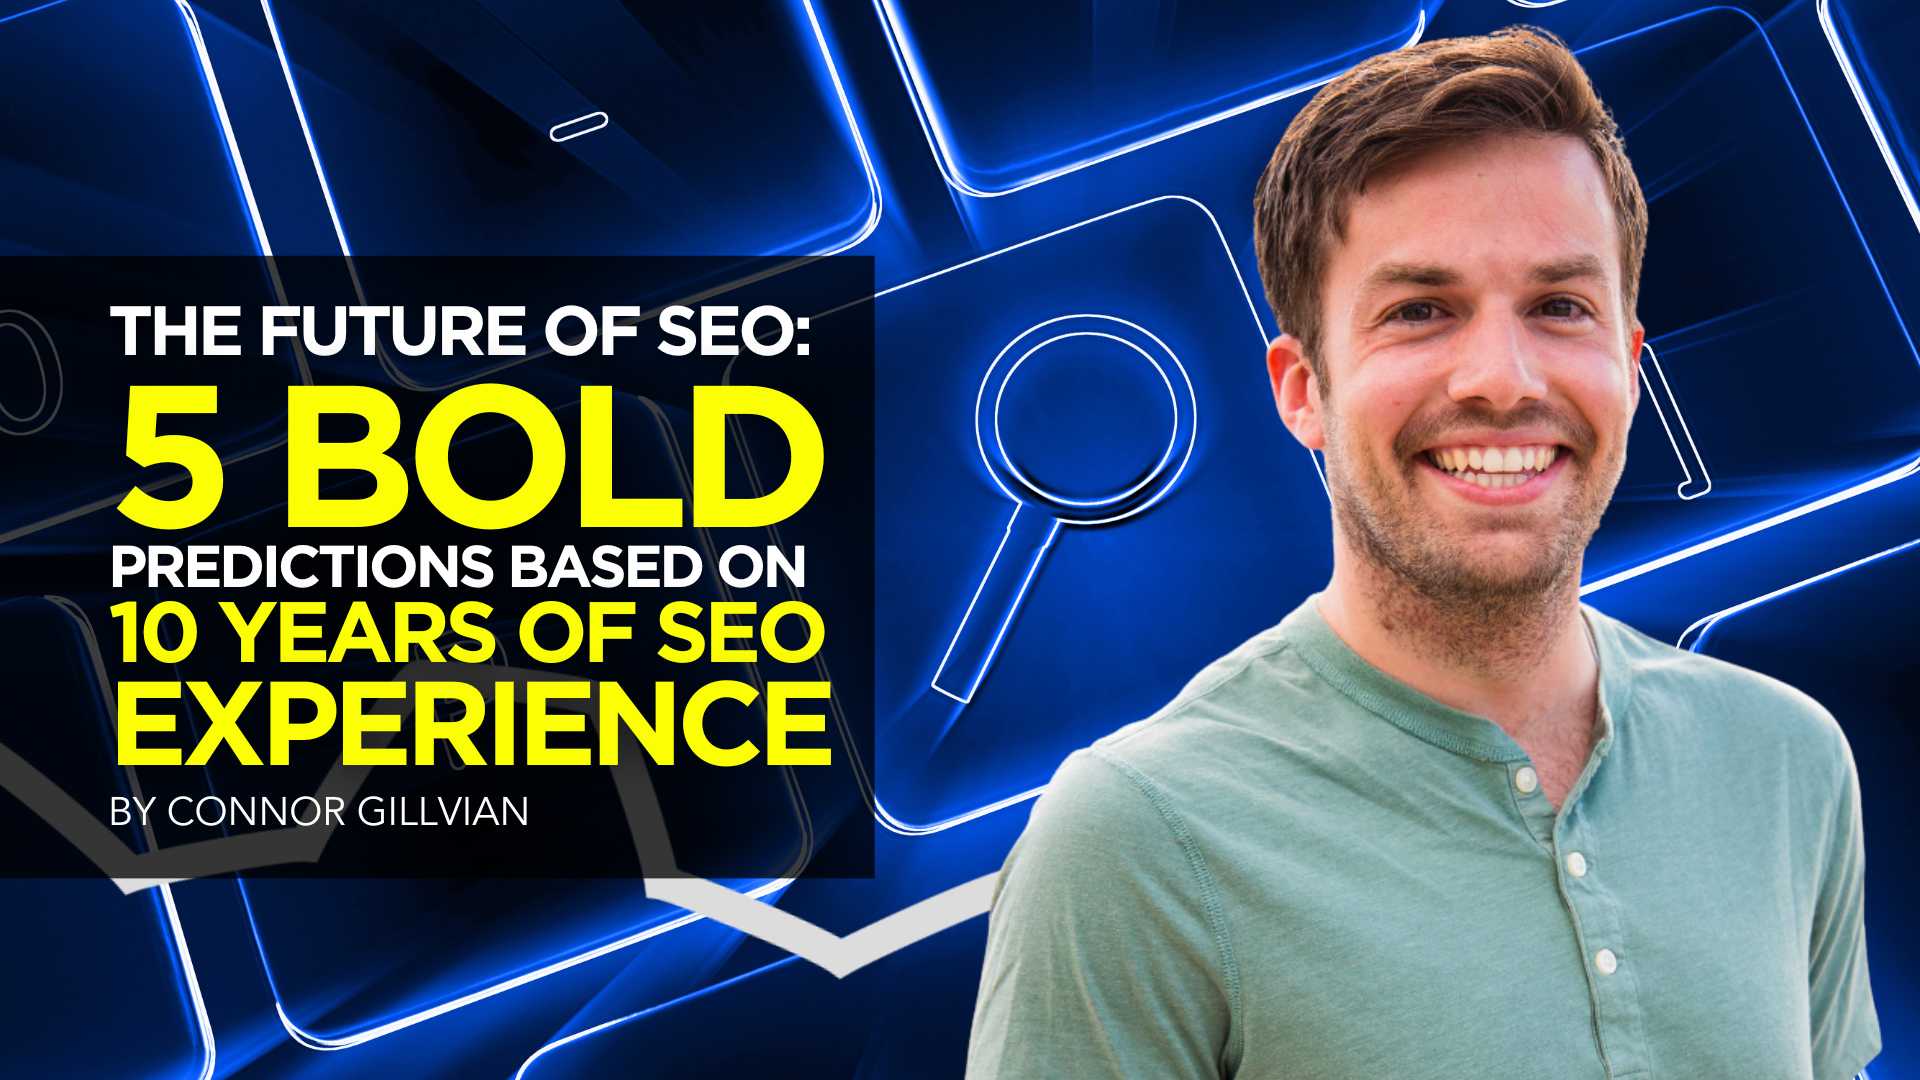 The Future of SEO: 5 Bold Predictions Based on 10 Years of SEO Experience